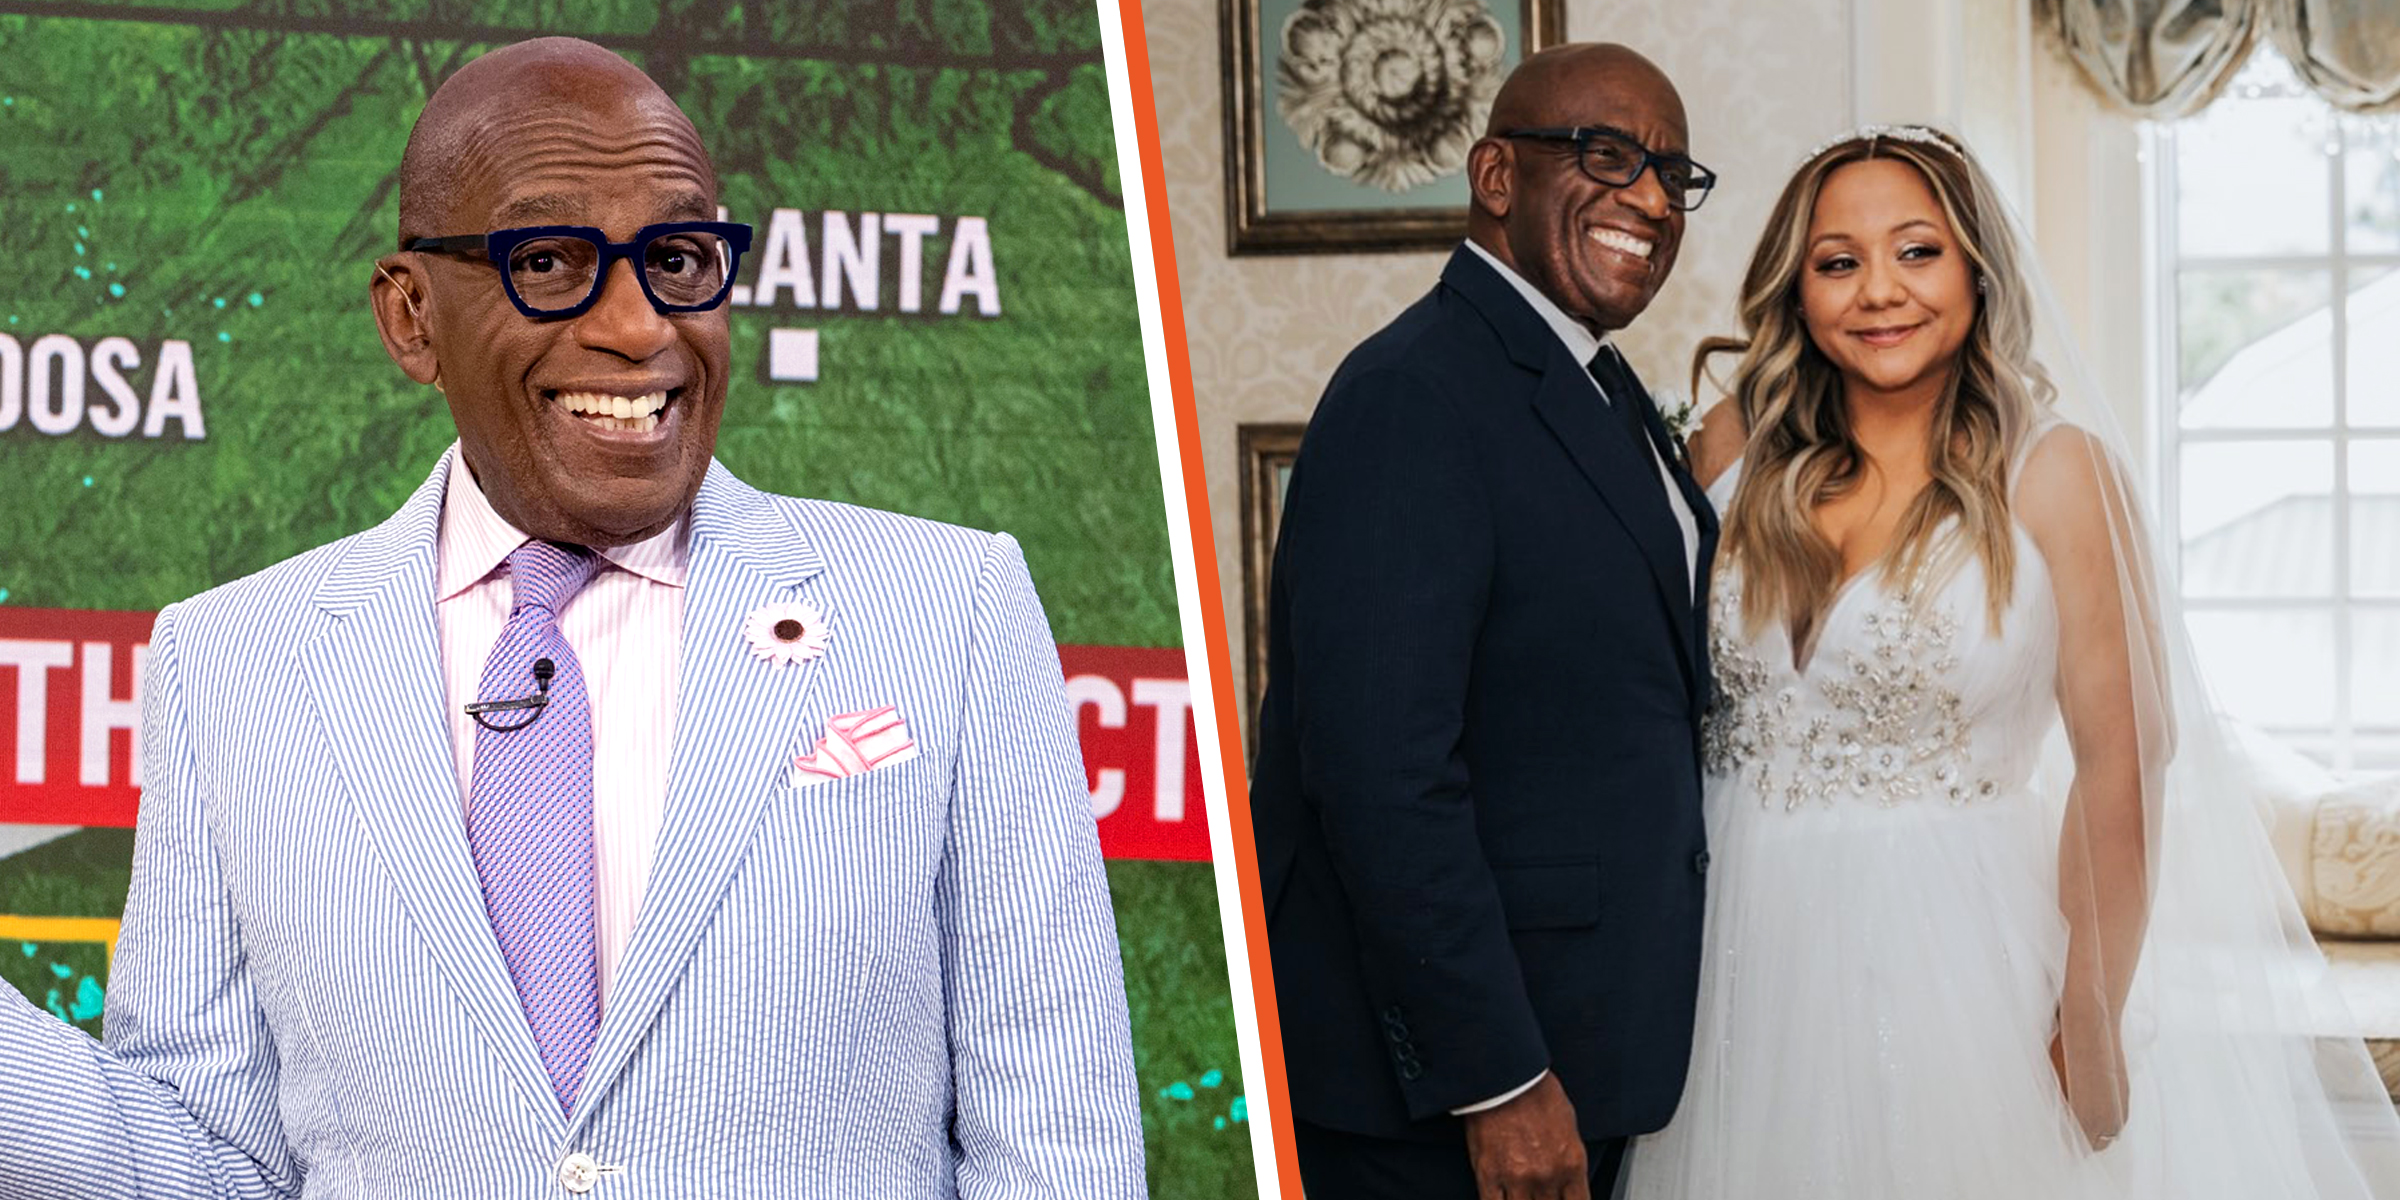 Al Roker | Al and Courtney Roker | Sources: Getty Images | Instagram.com/@ouichefroker